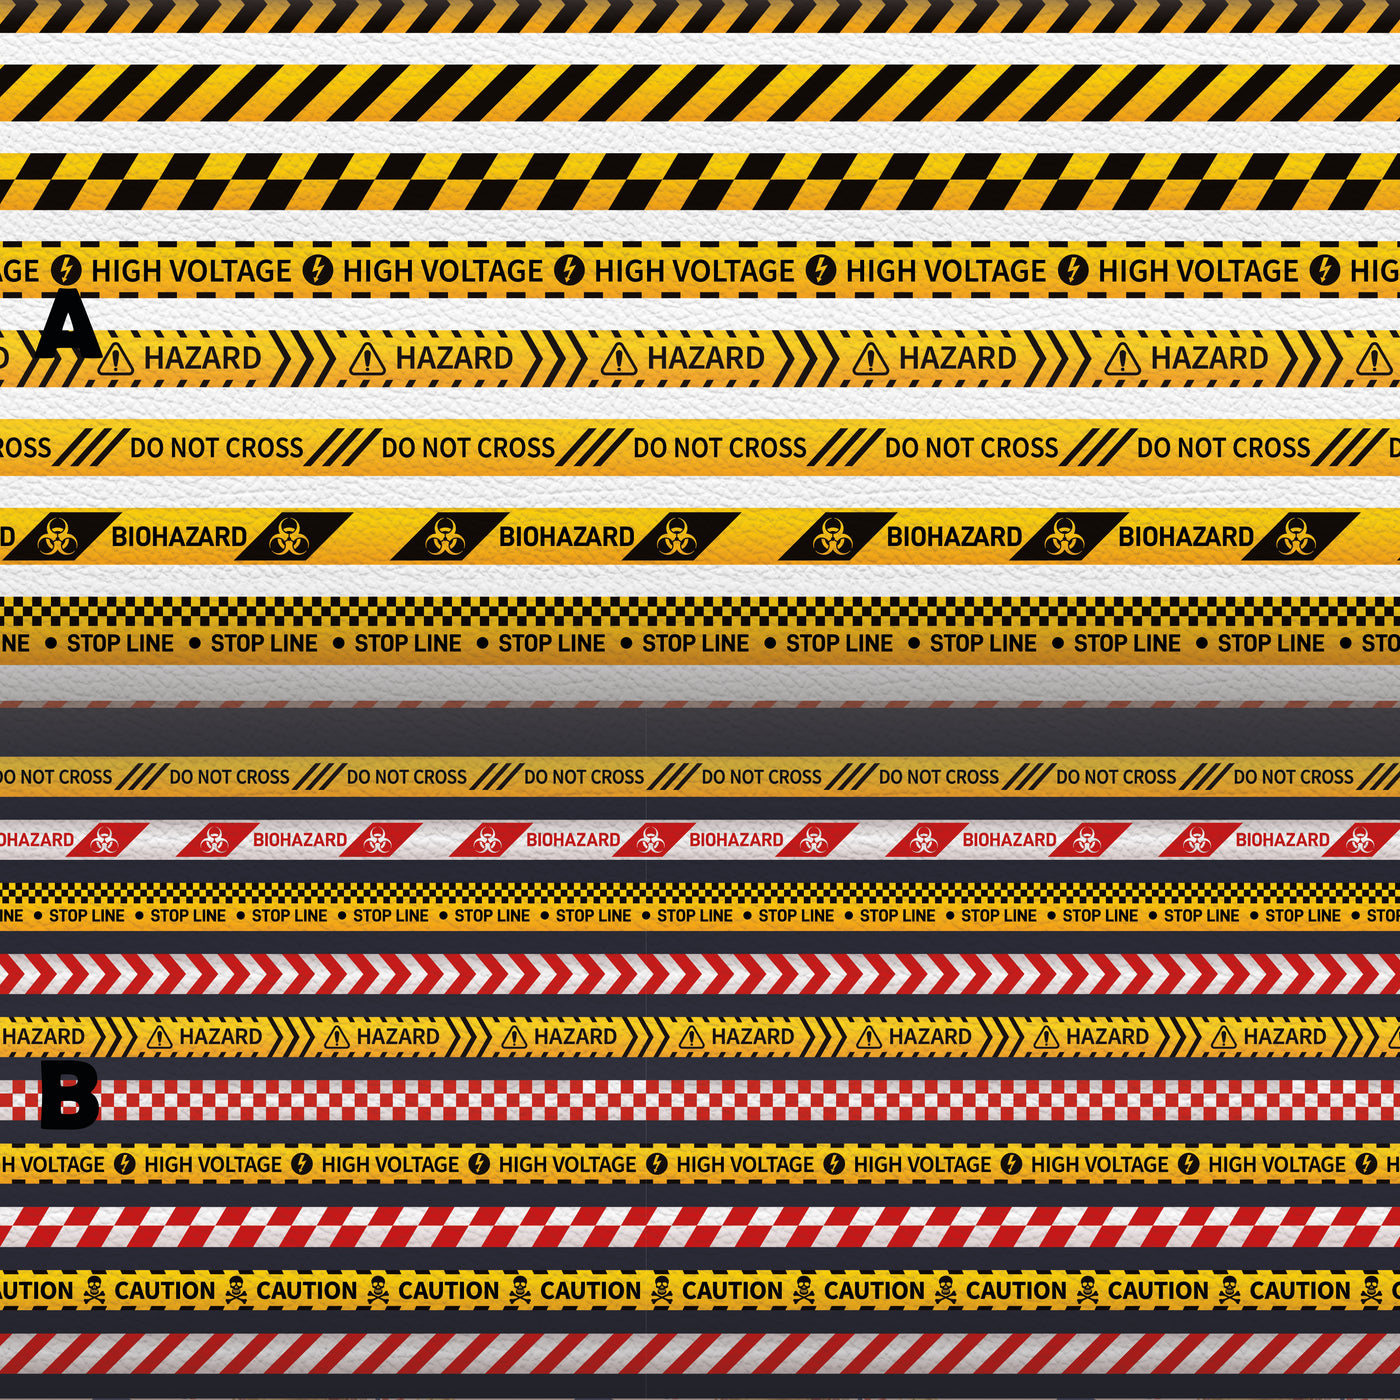 Caution Tape Hazard Warning Construction Fabric - Pu Leather vinyl - canvas - choose Fabric material Sheets